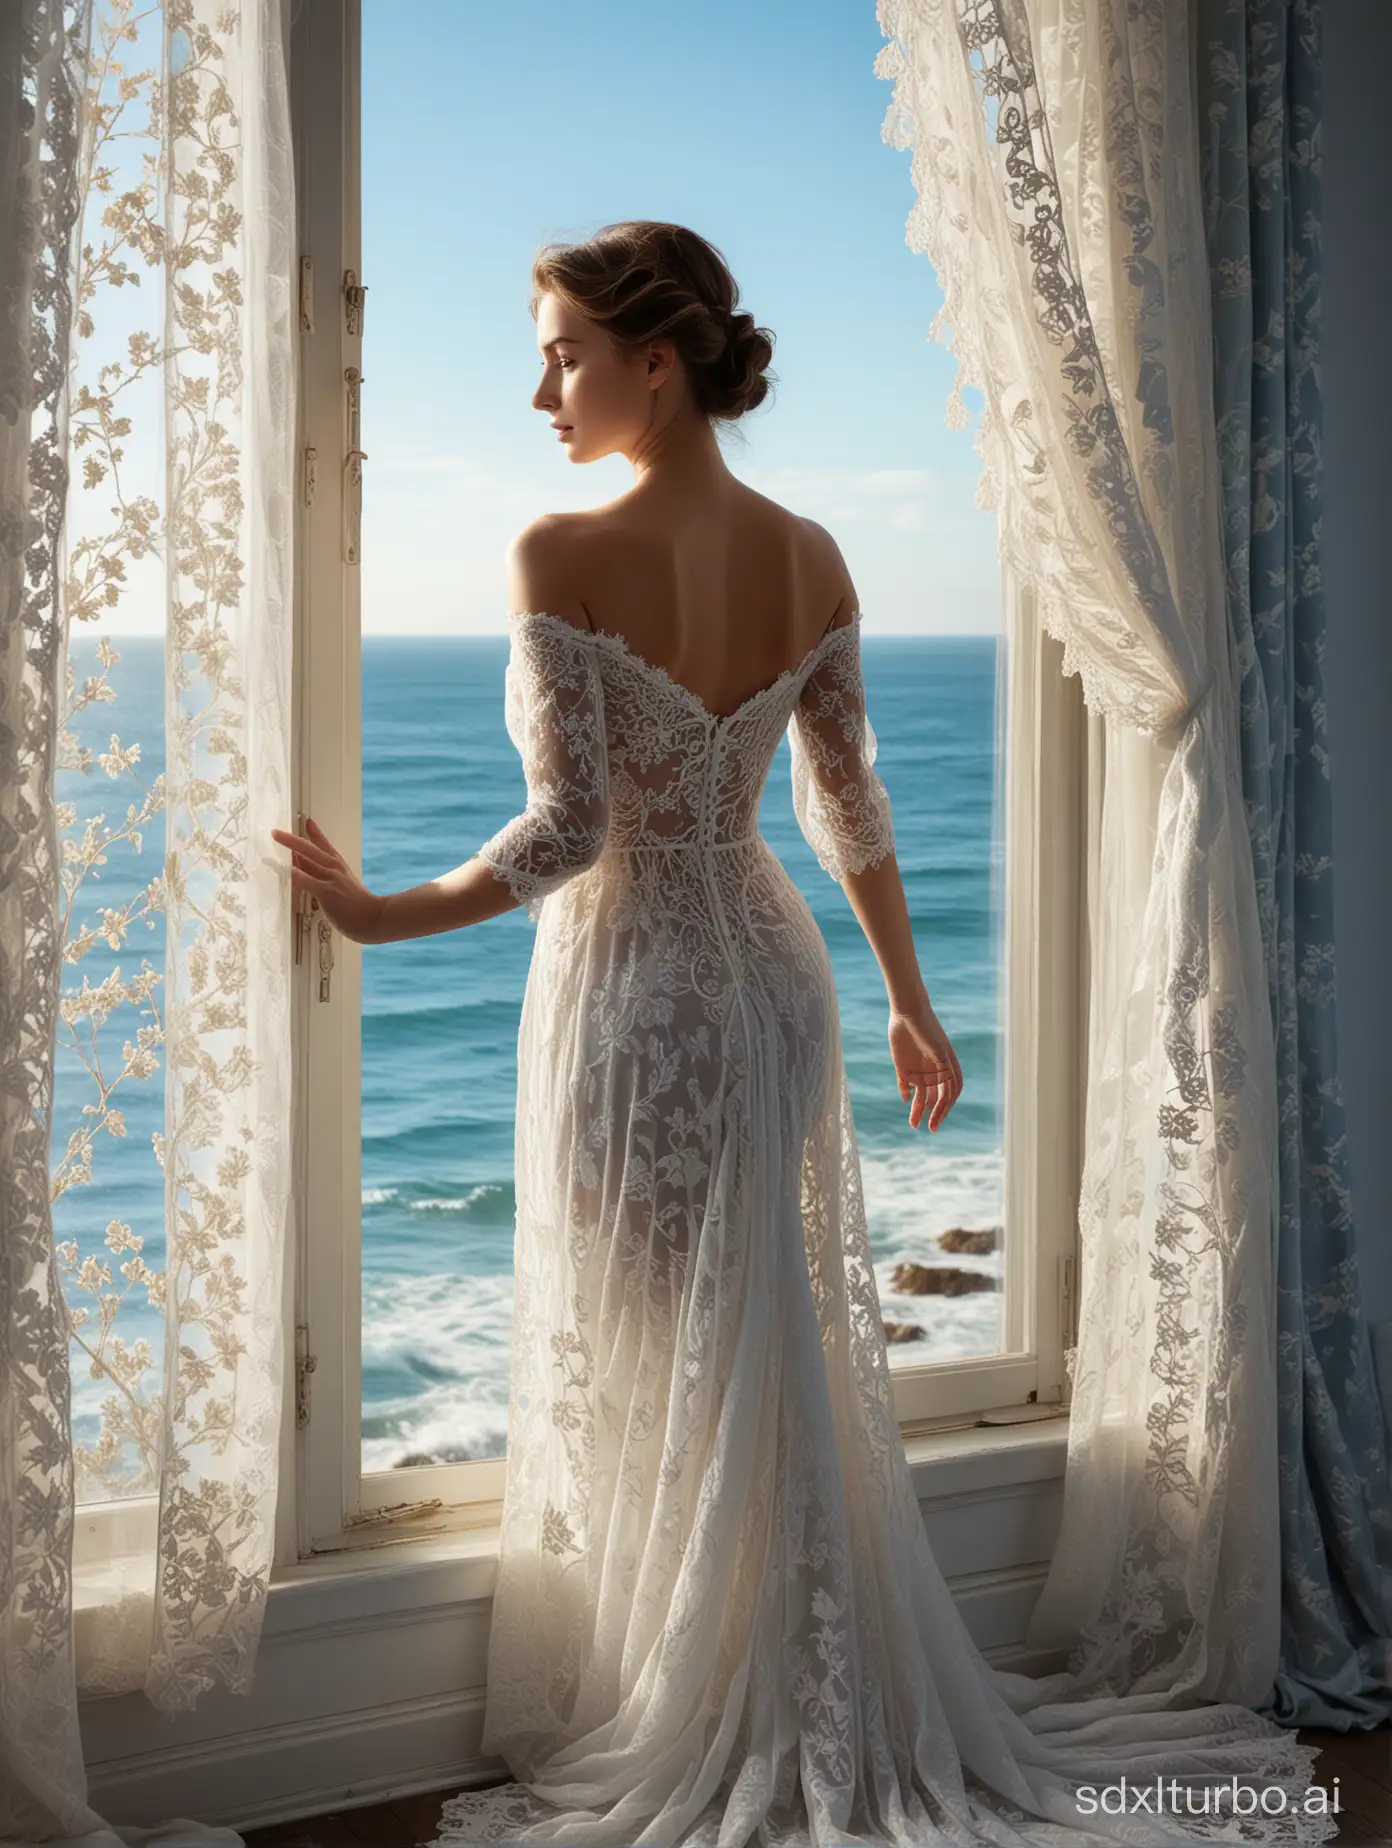 "Imagine a stunning scene where a beautiful woman gazes out of a window, her silhouette framed against the backdrop of a vast blue sea stretching towards the horizon. The gentle sunlight bathes her features, accentuating her delicate beauty as she contemplates the endless expanse ahead. Every detail, from the intricate lace curtains gently swaying in the breeze to the subtle interplay of light on her skin, adds depth and richness to the composition. It's a moment frozen in time, reminiscent of the timeless elegance captured by artists like Monet in his tranquil seascapes."